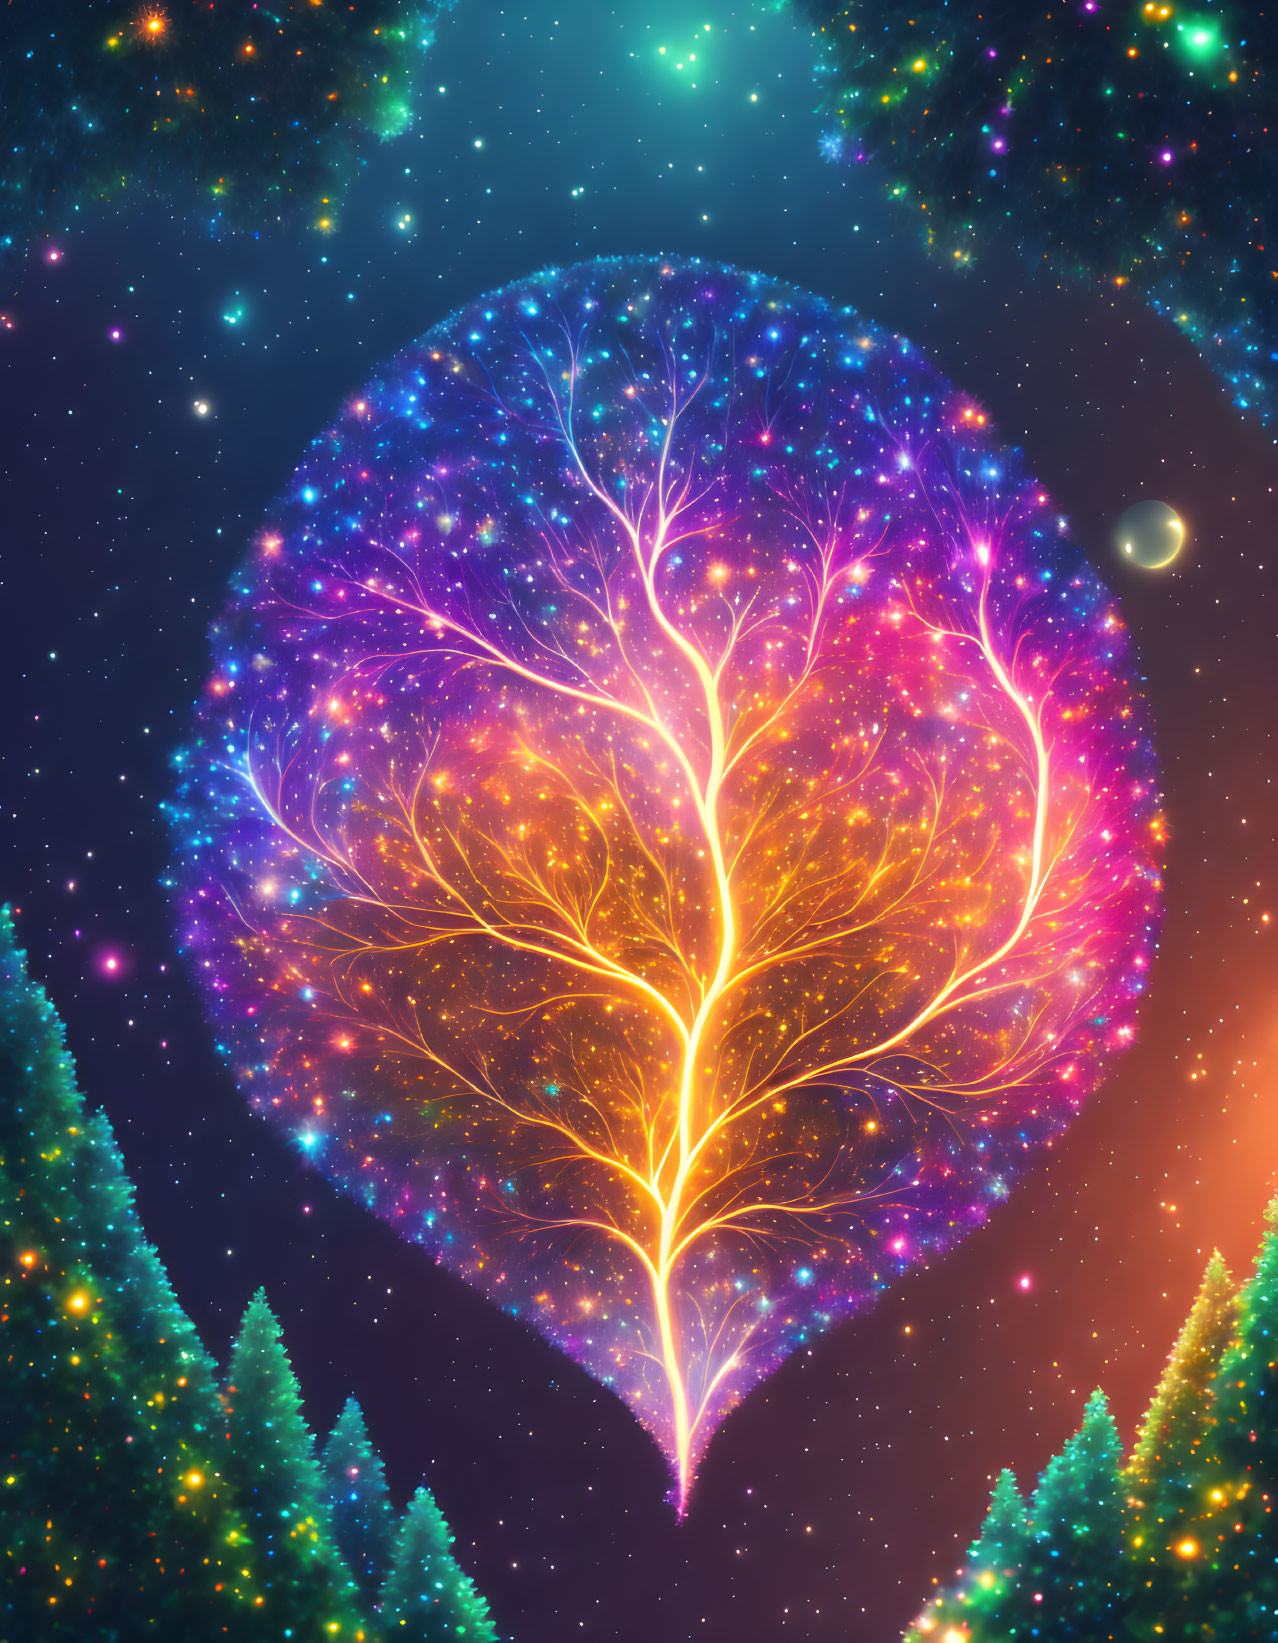 Vibrant cosmic tree with glowing branches in starry space scene